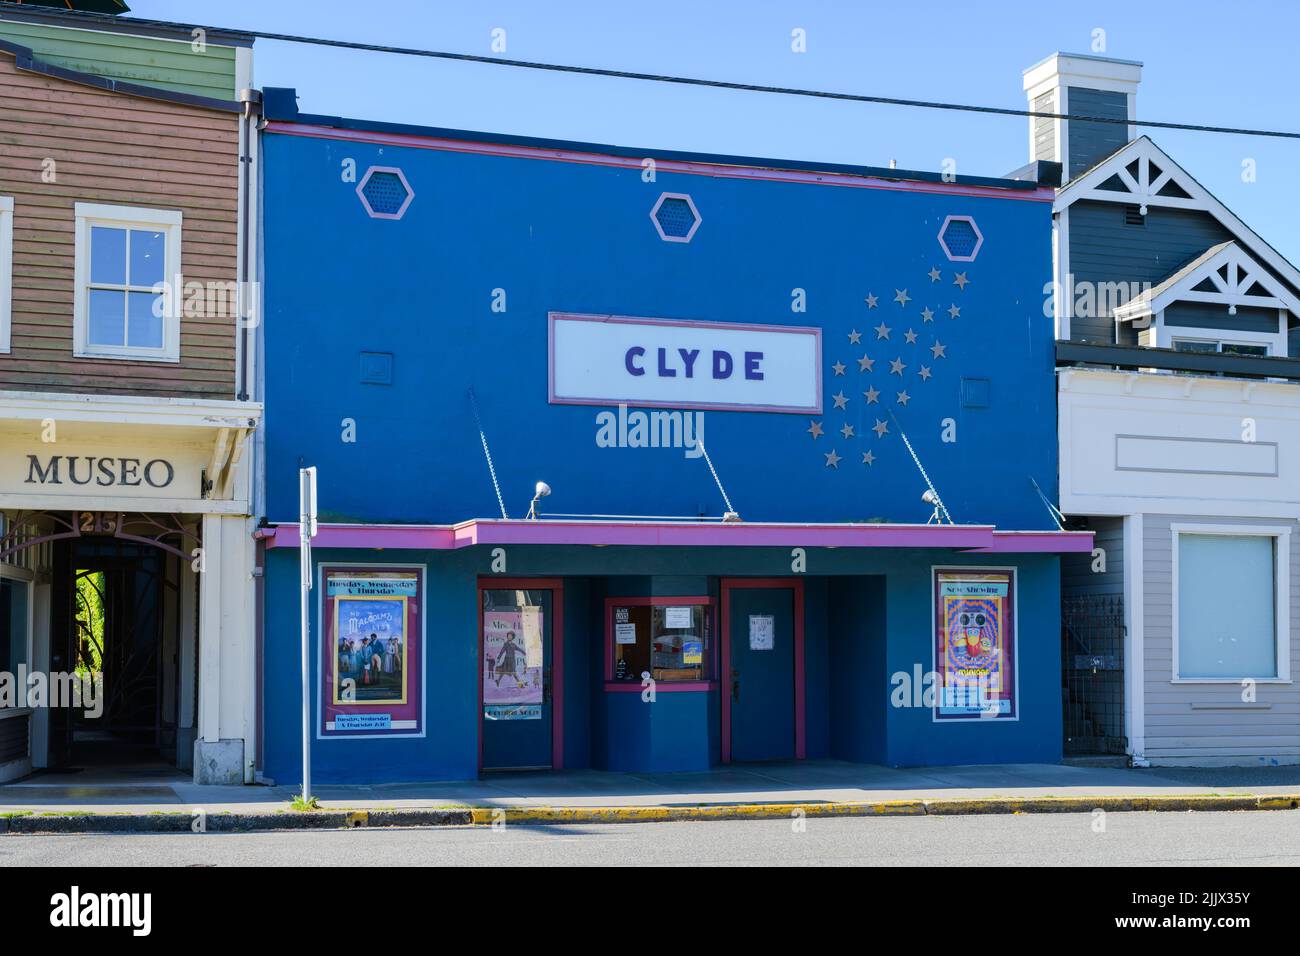 langley, WA, USA - July 26, 2022; Old time Clyde Theatre in Langley on Whidbey Island Washington with awning and movie posters Stock Photo